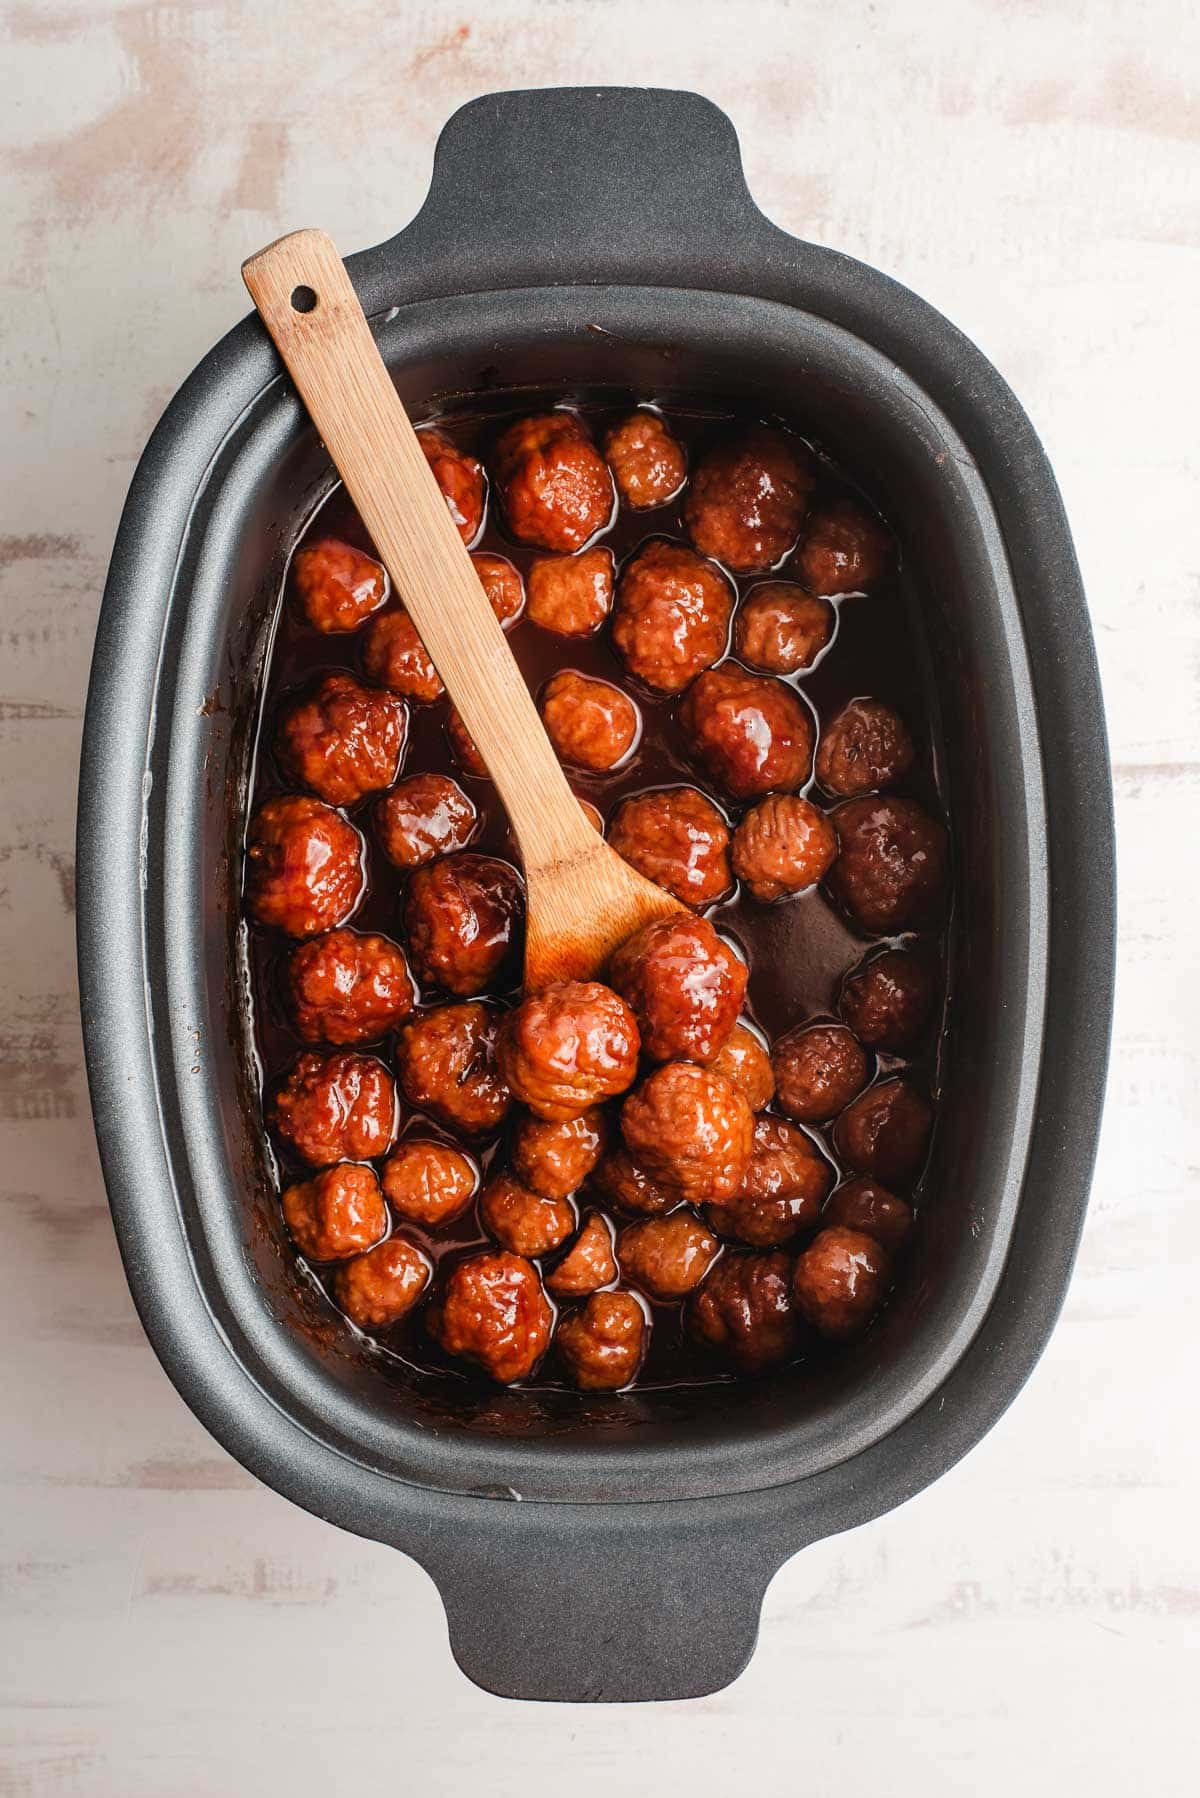 Crock pot full of cooked bbq grape jelly meatballs.